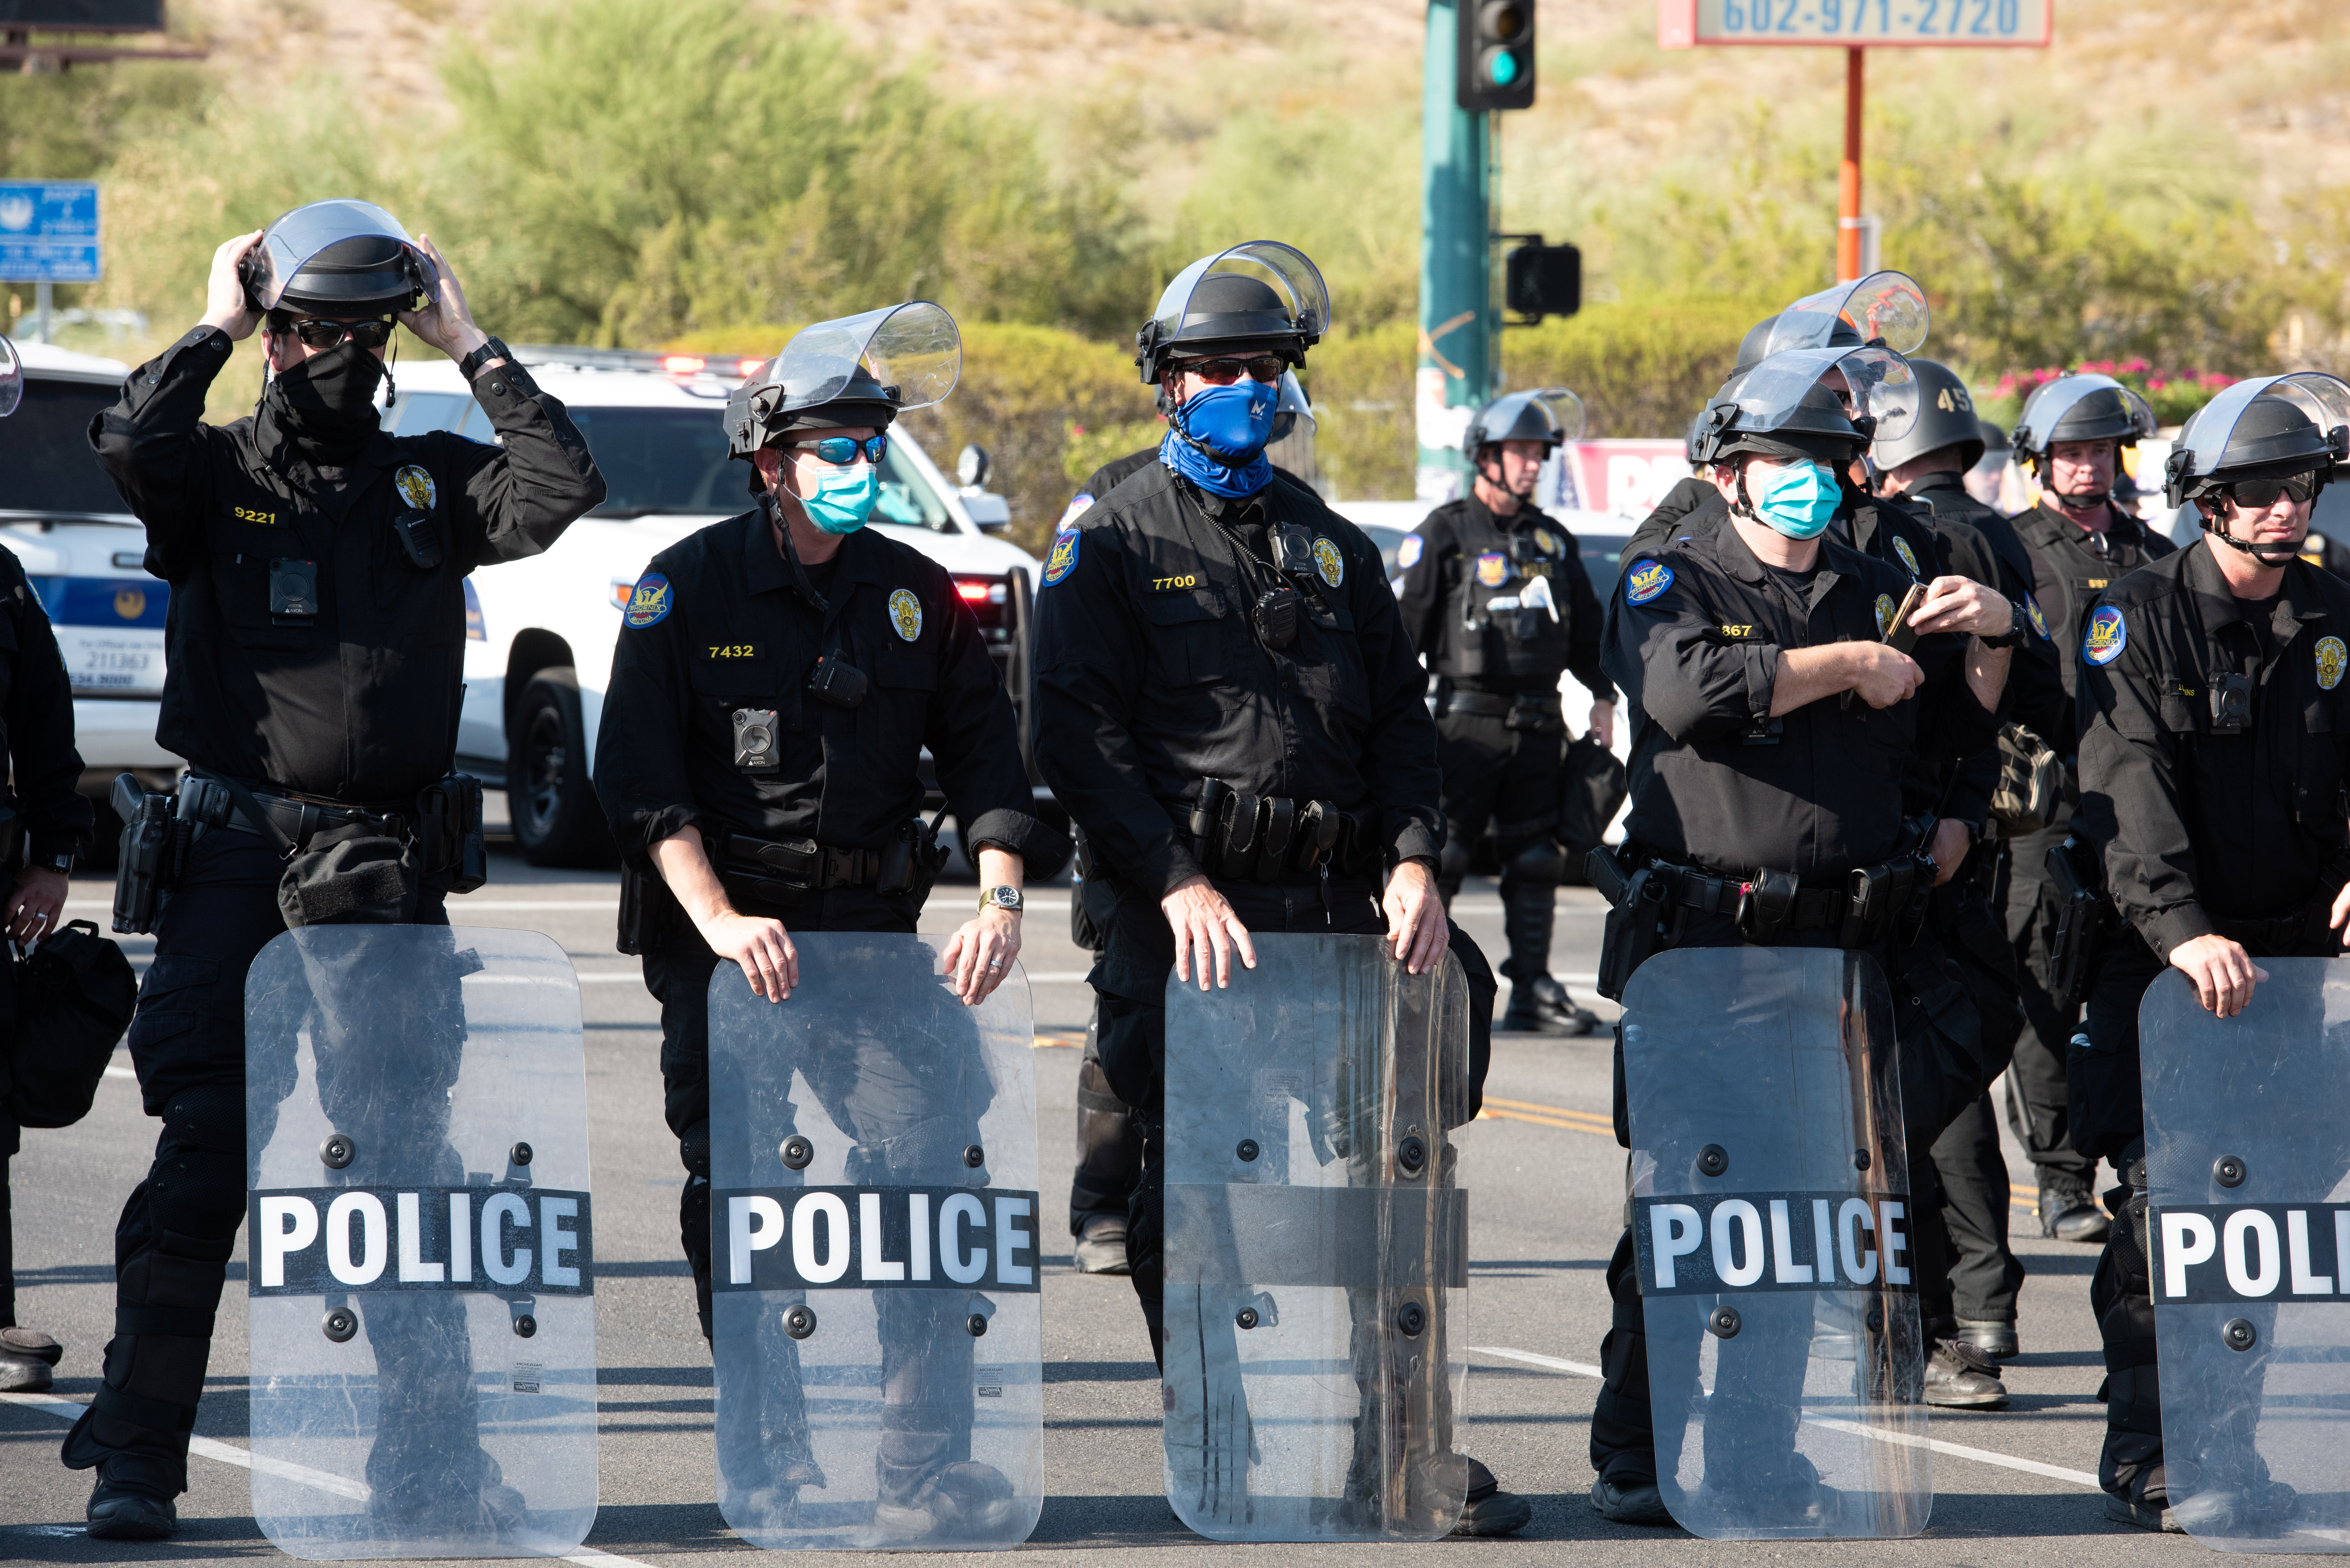 U.S. probes Phoenix police use of pressure, treatment method of protesters